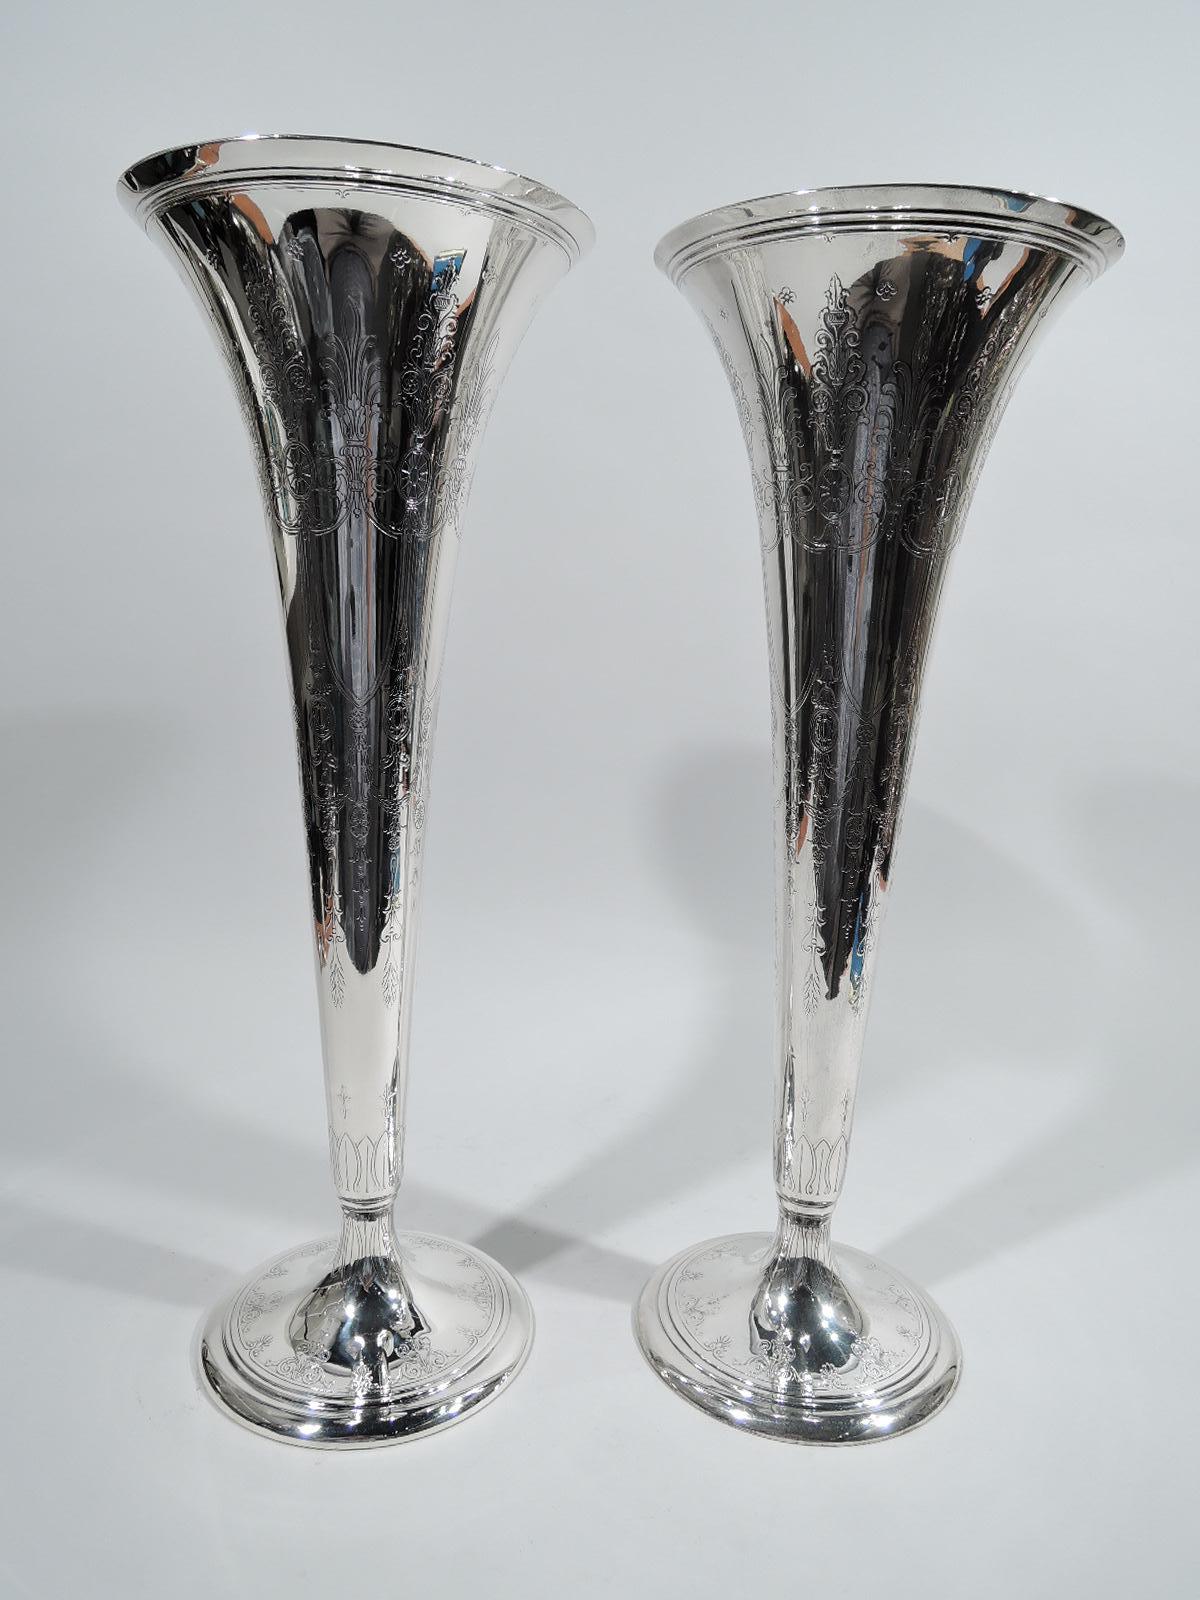 Pair of Edwardian Regency sterling silver trumpet vases. Made by Tiffany & Co. in New York, ca 1913. Each: Tapering sides and stepped raised foot. Acid-etched repeating pattern with swags and paterae and armorial shield frames (all vacant). Stylized